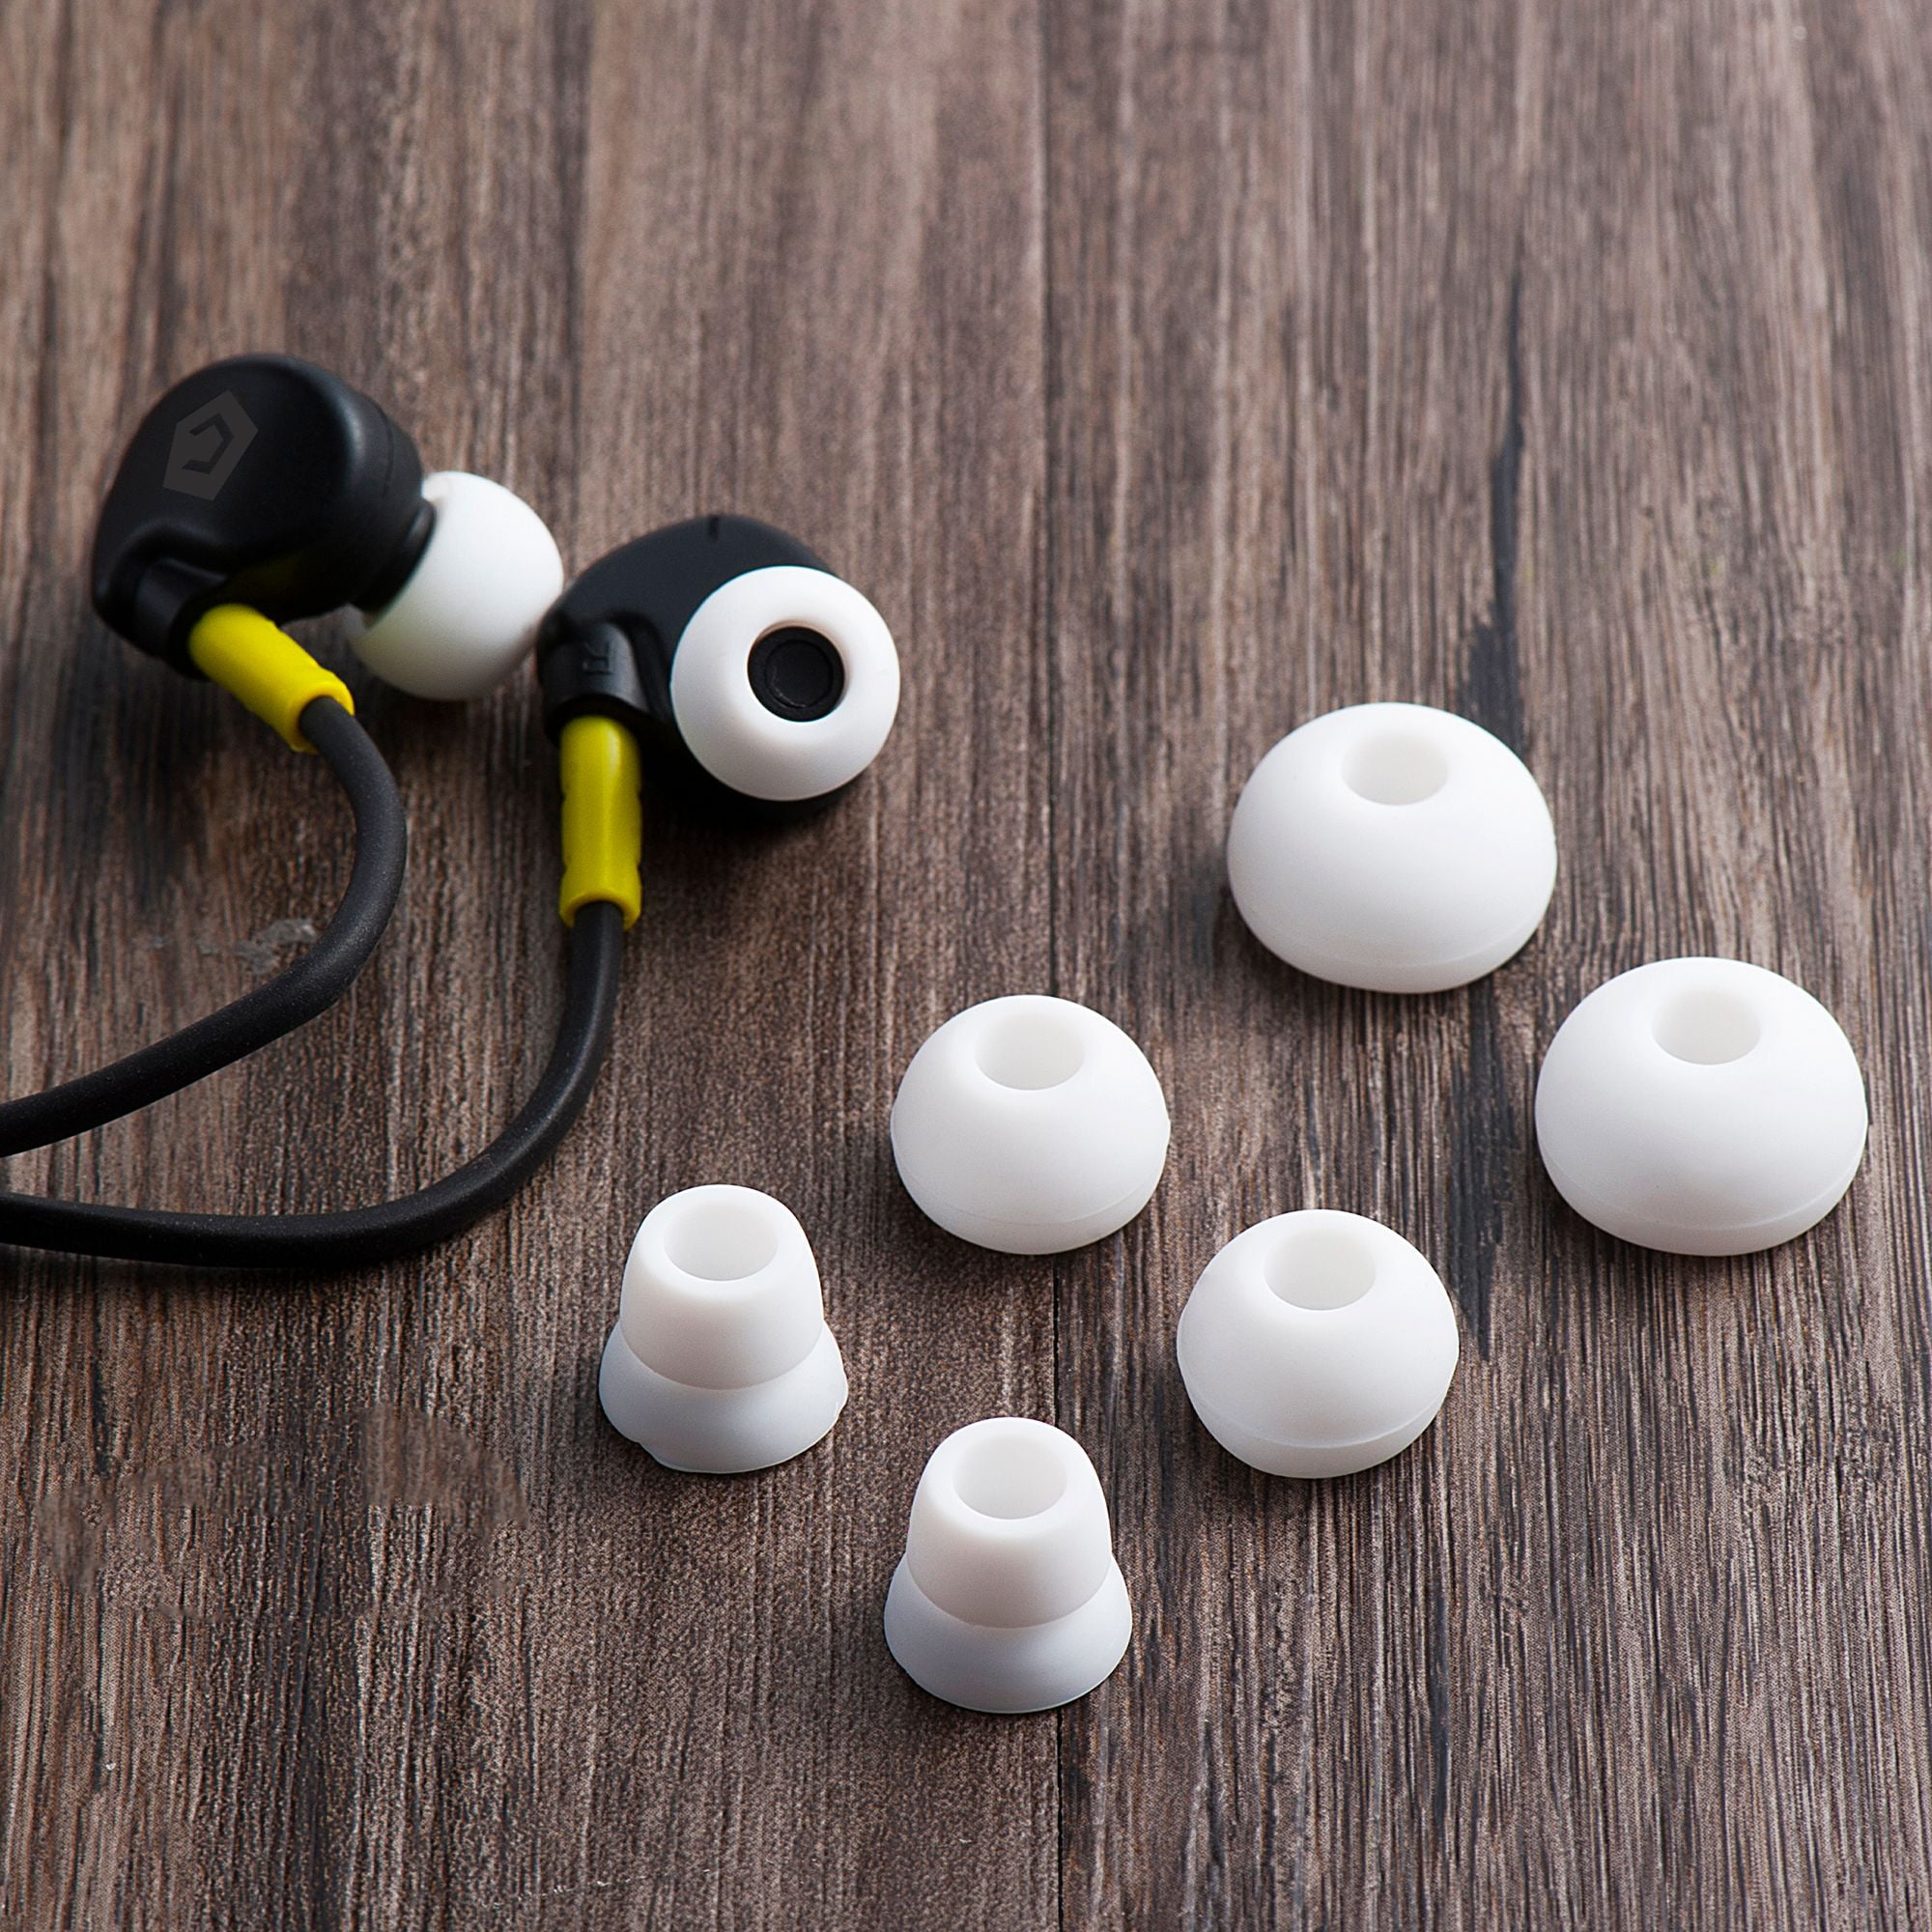 beats wireless earbuds pieces